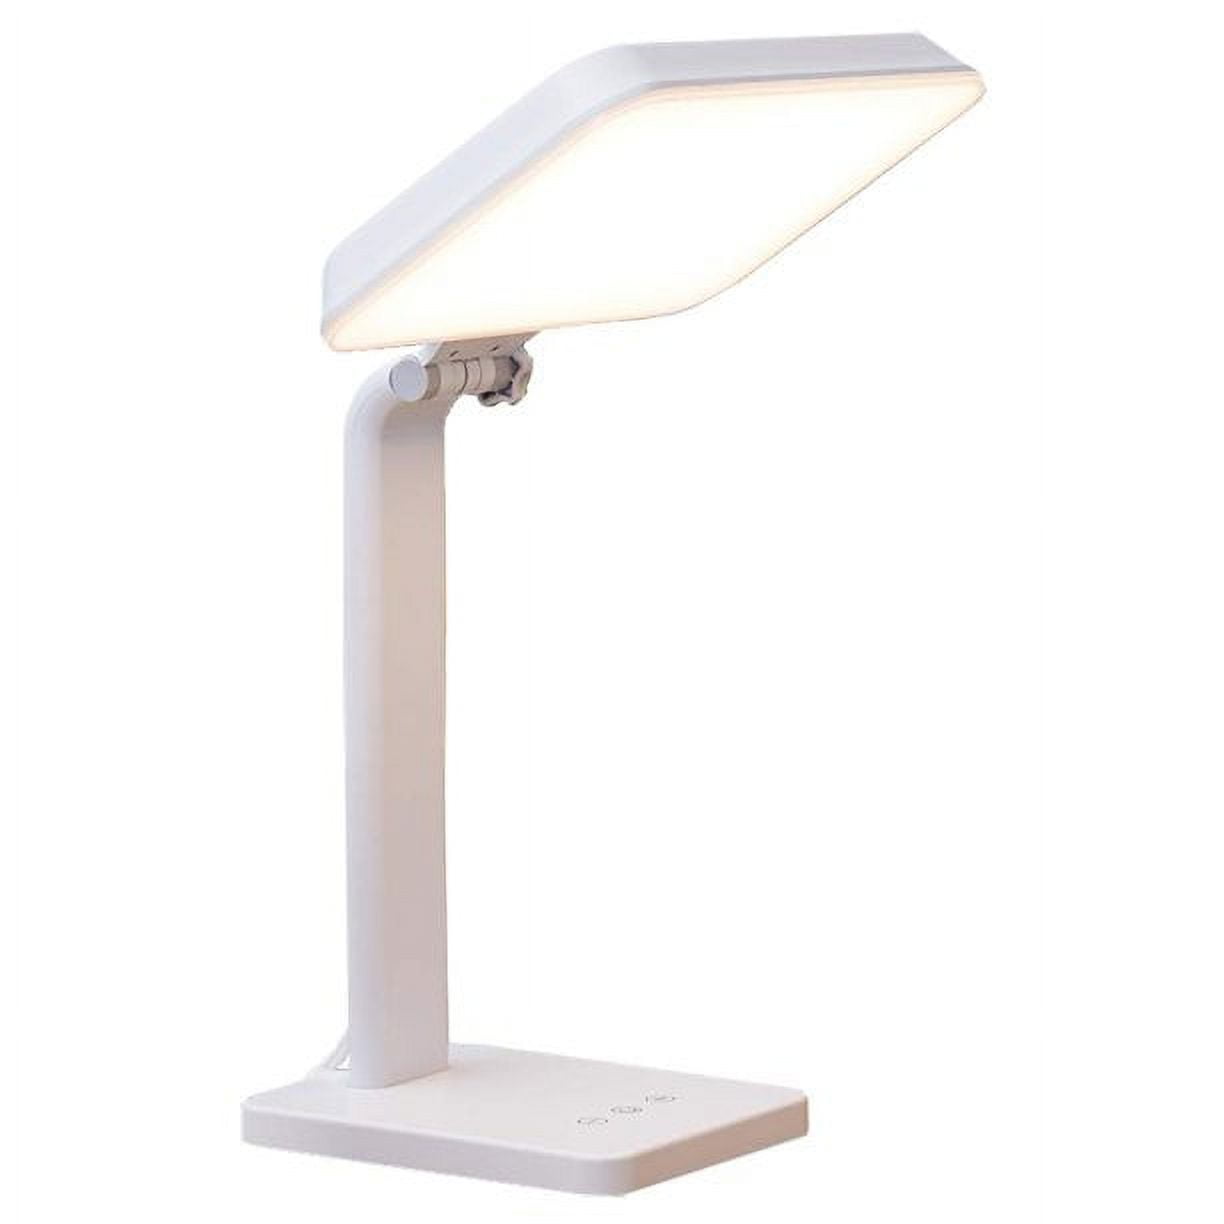 TheraLite Glow Bright Light Therapy Lamp - 10,000 LUX LED Lamp - Sun Lamp  Mood Light to Fight Low Energy and Sunlight Deprivation, White Light Box